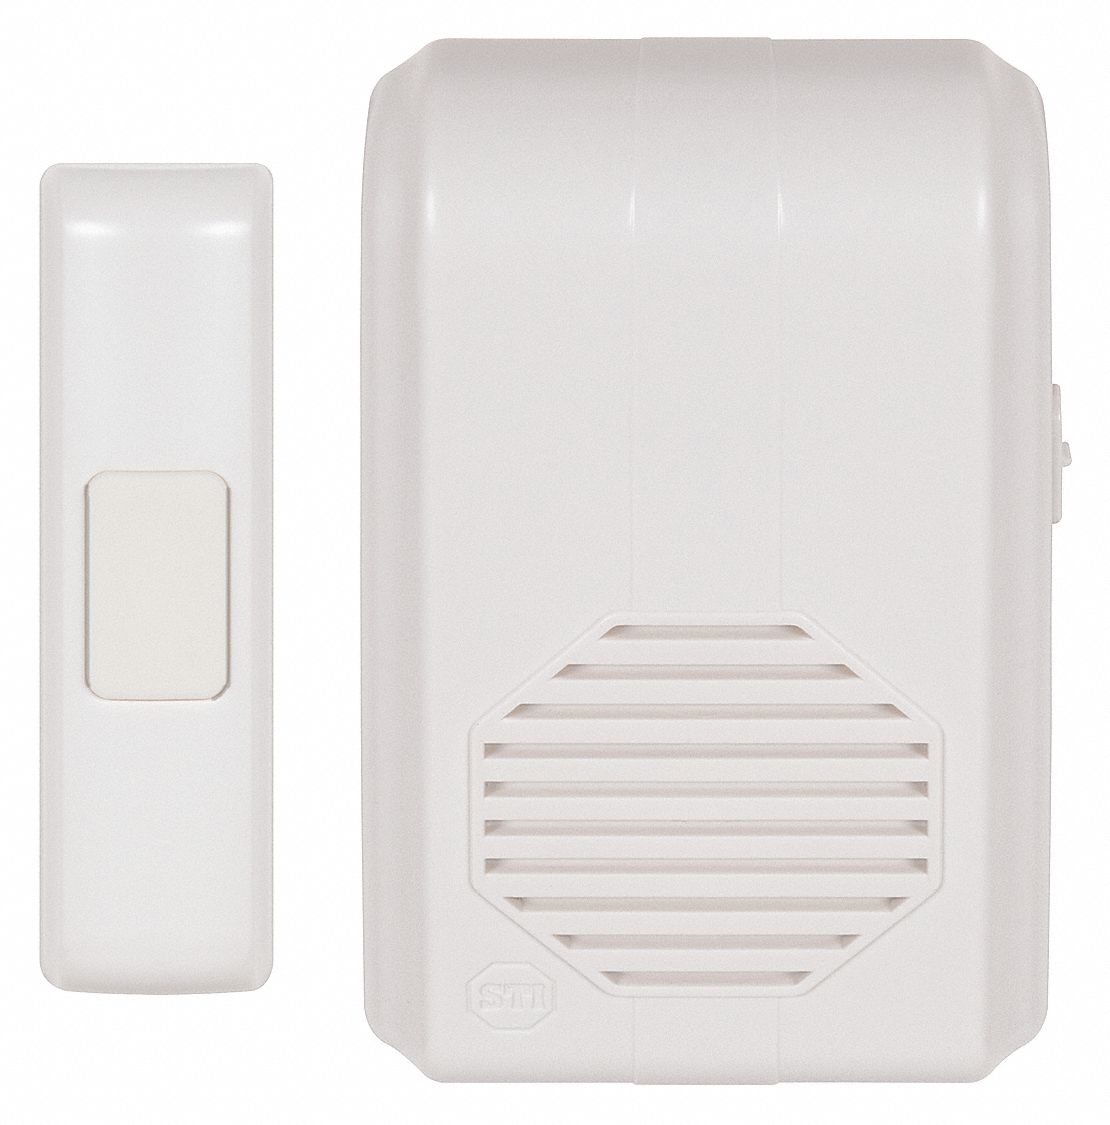 Details about    V-Zorr Electronic Wireless Doorbell Chime